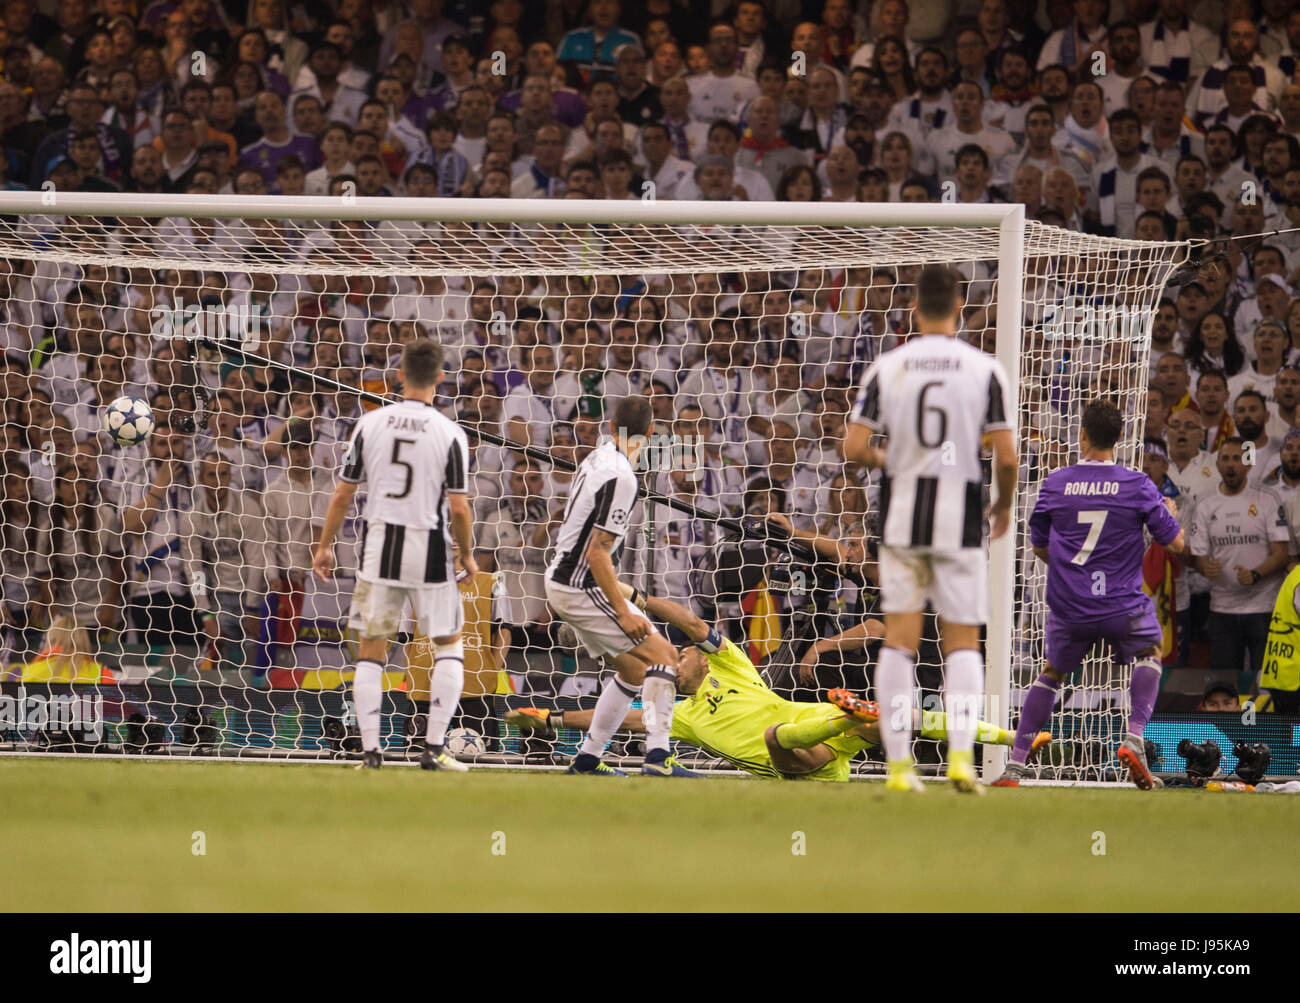 Cardiff, Wales. 3rd June, 2017. Cristiano Ronaldo (Real) Football/Soccer : Cristiano Ronaldo of Real Madrid scores his team's third goal past goalkeeper Gianluigi Buffon of Juventus during the UEFA Champions League Final match between Juventus 1-4 Real Madrid at Millennium Stadium in Cardiff, Wales . Credit: Maurizio Borsari/AFLO/Alamy Live News Stock Photo